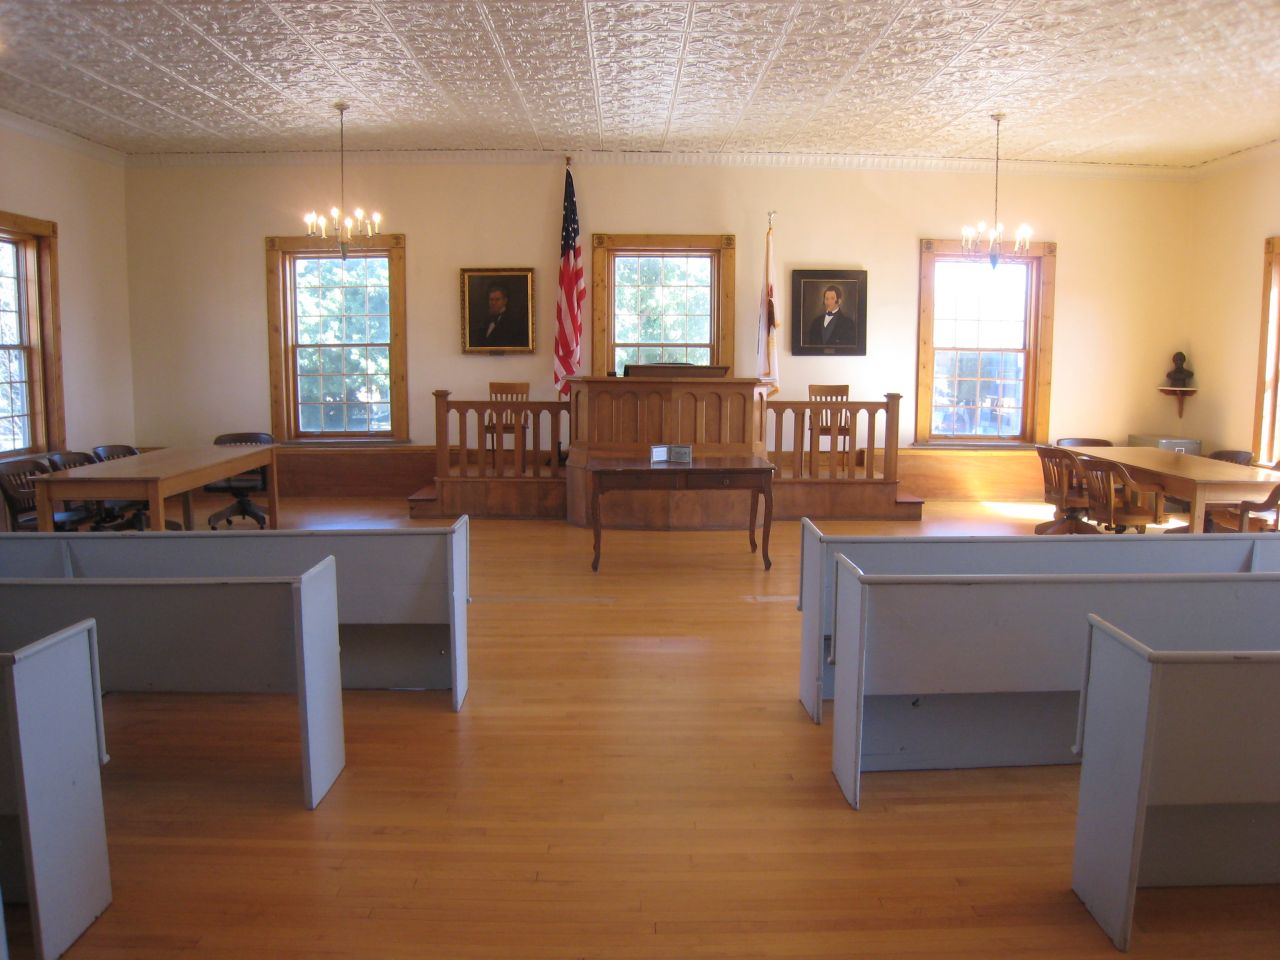 The Lincoln Courtroom